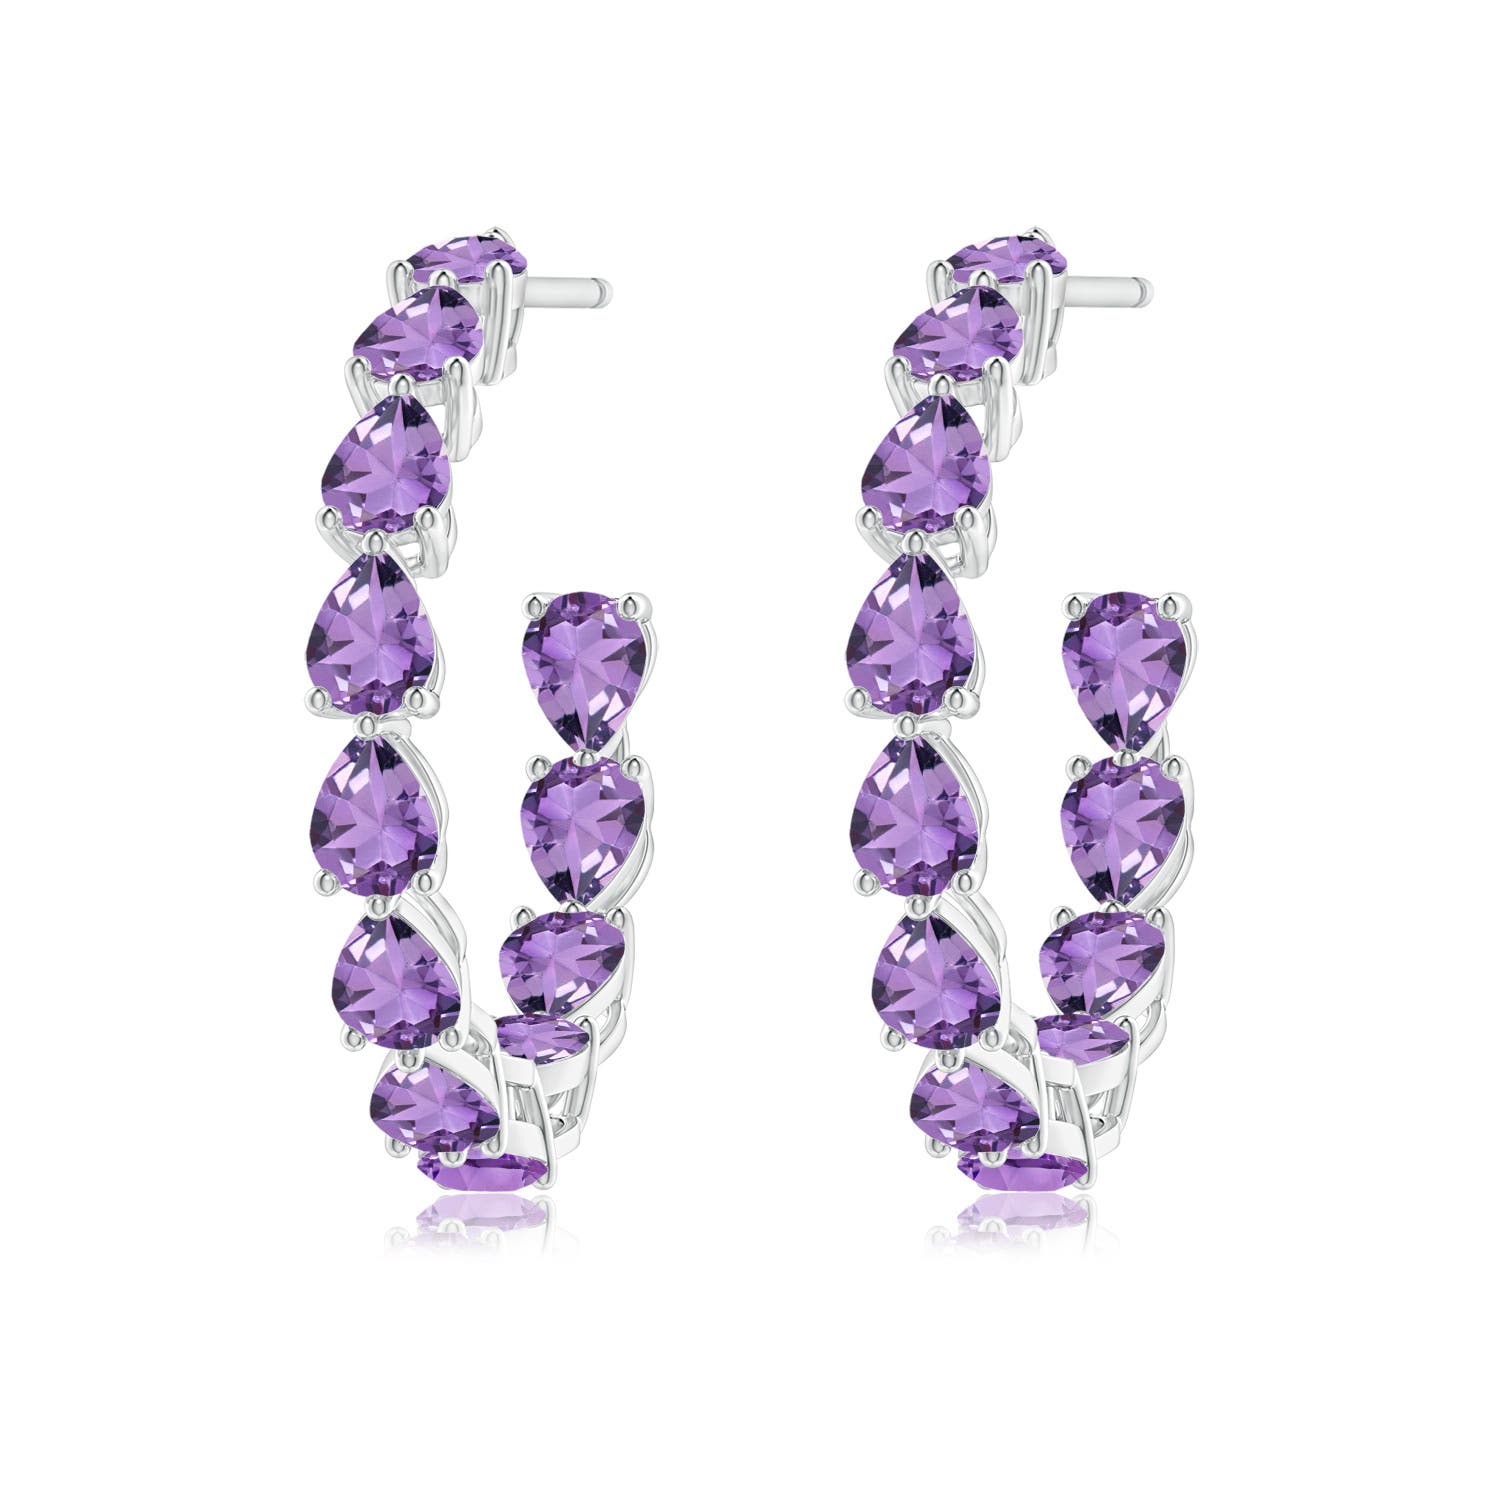 A - Amethyst / 3.12 CT / 14 KT White Gold